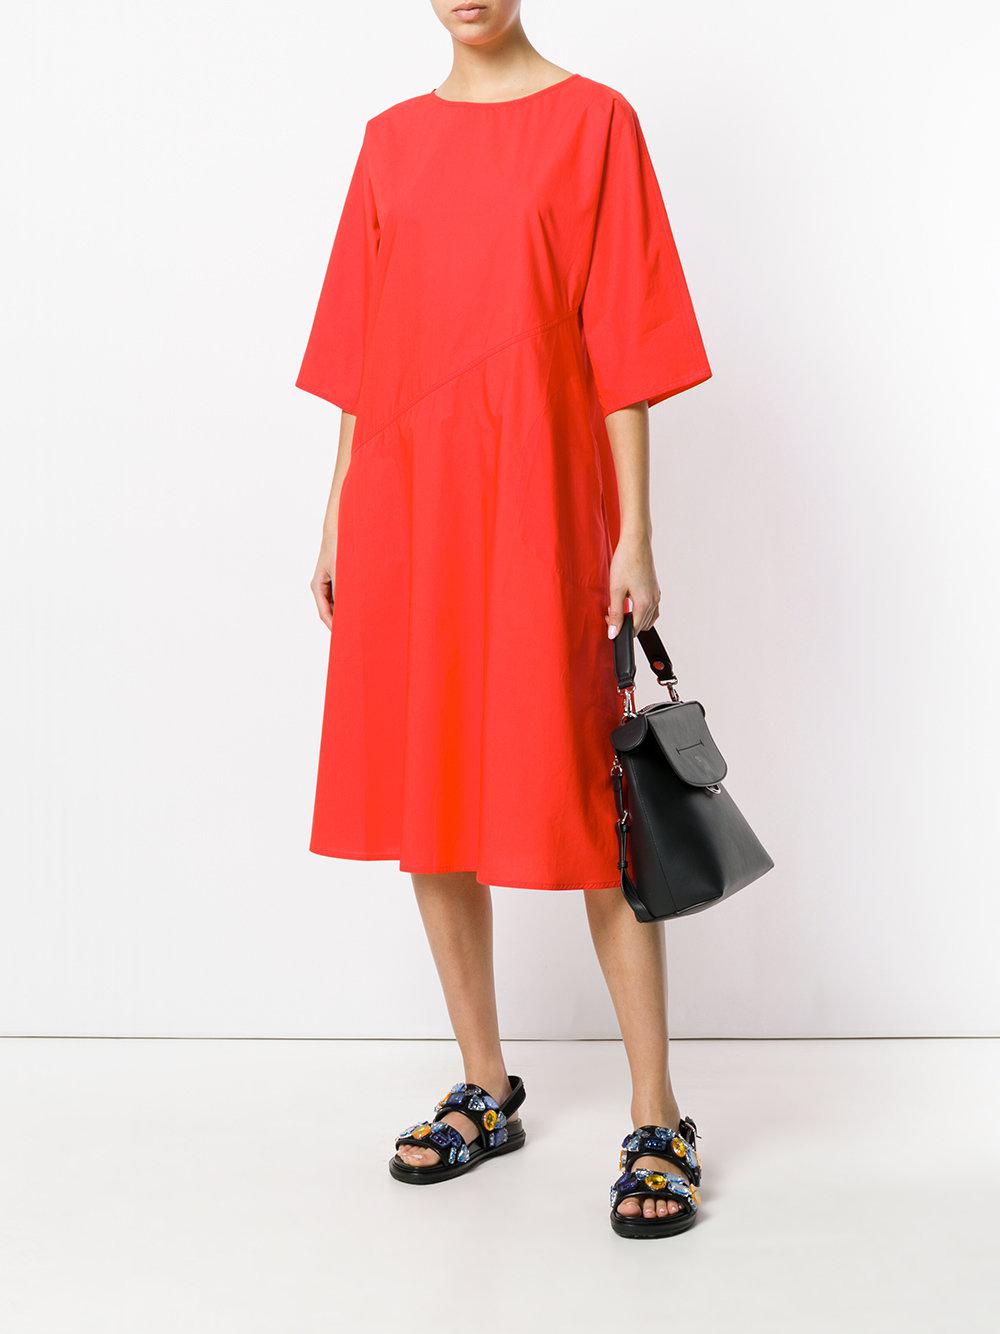 Lyst - Sofie D'Hoore Mid-length Shift Dress in Red